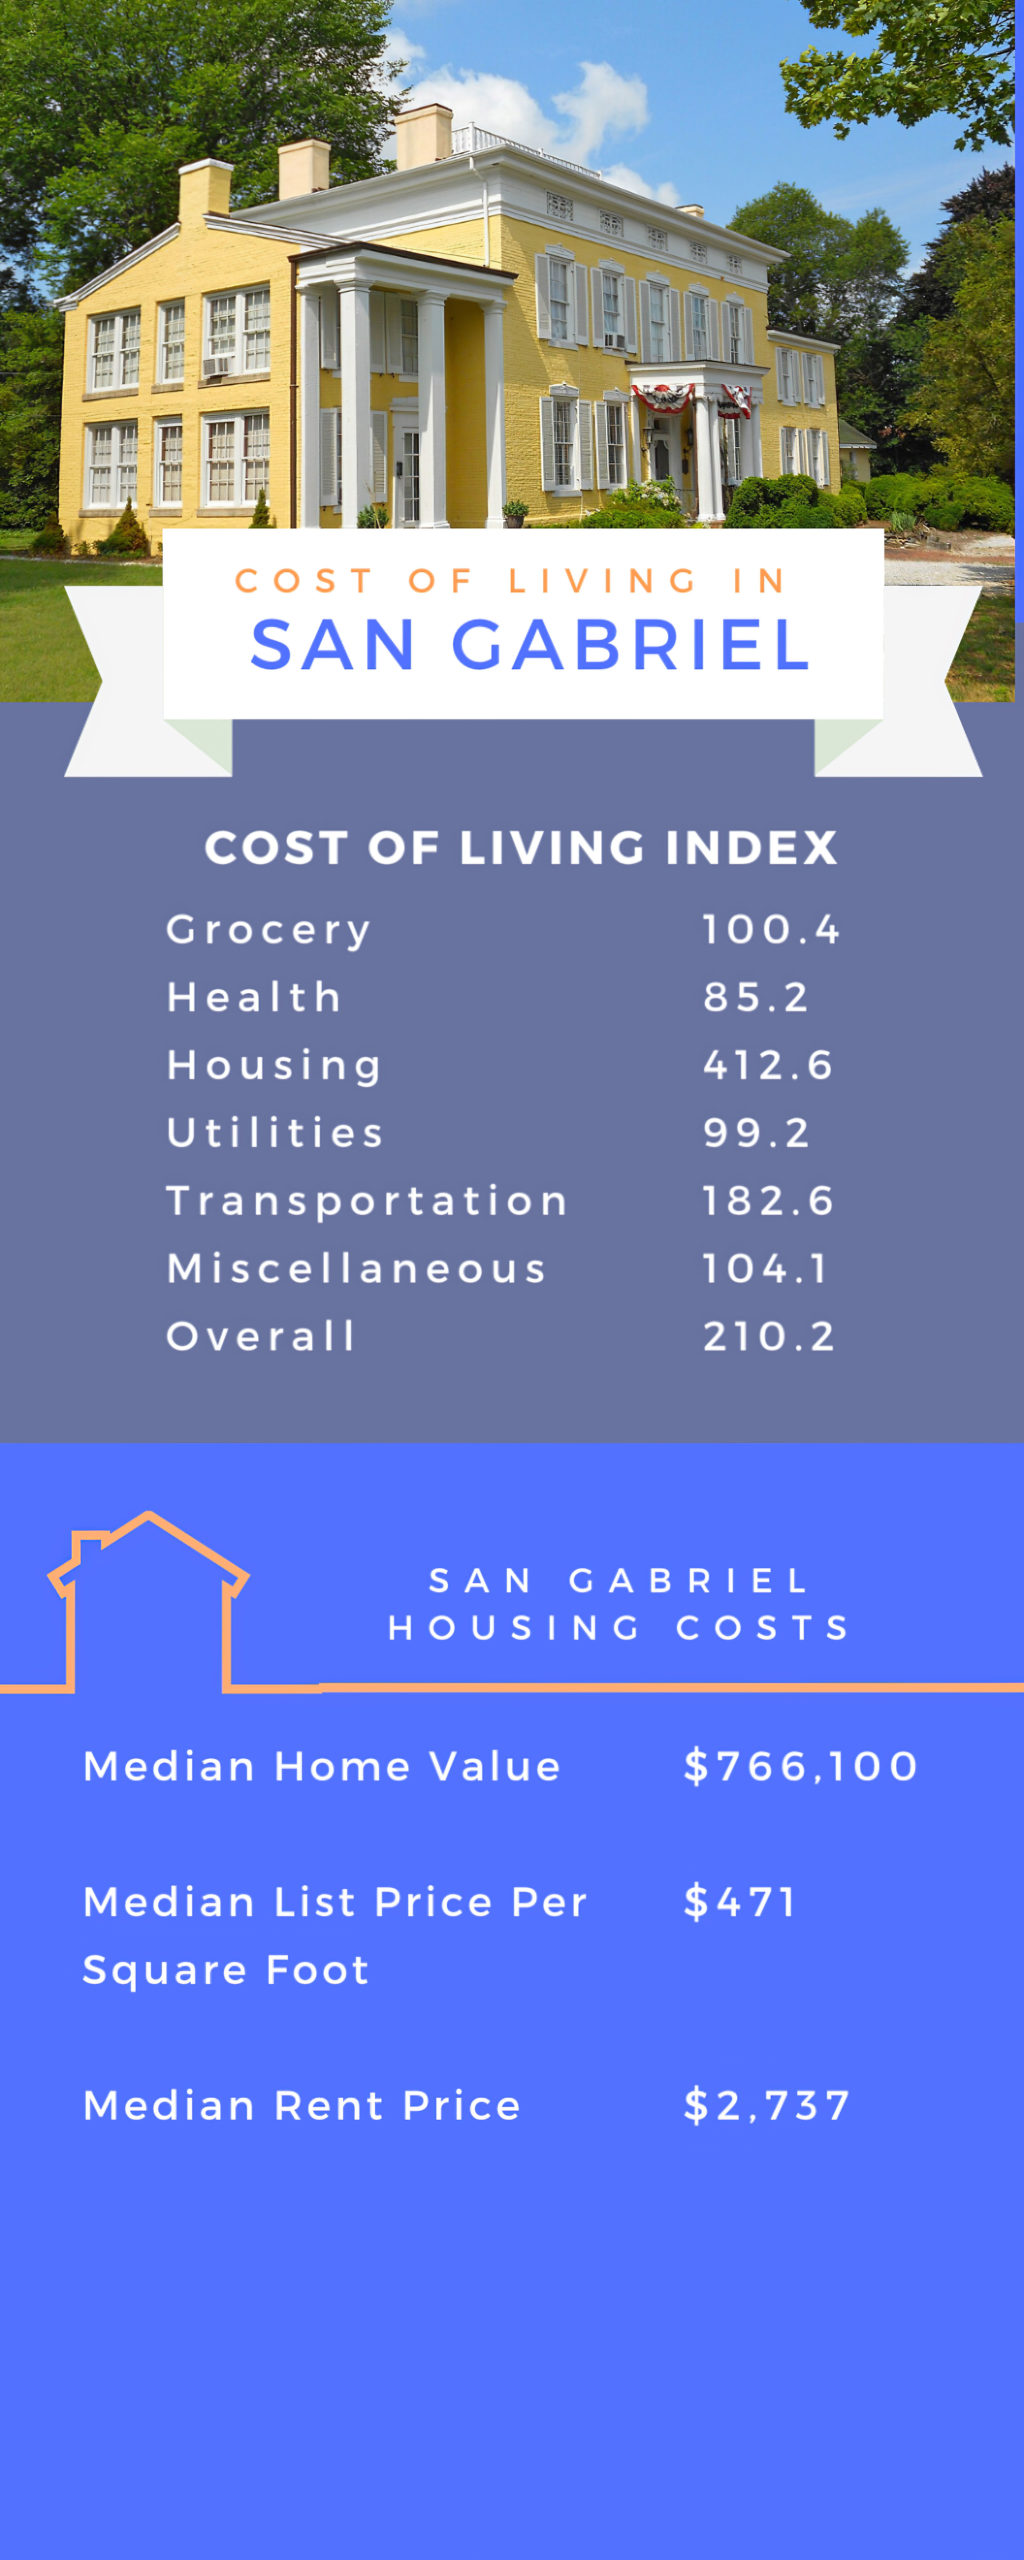 Cost of living Index in San Gabriel, CA